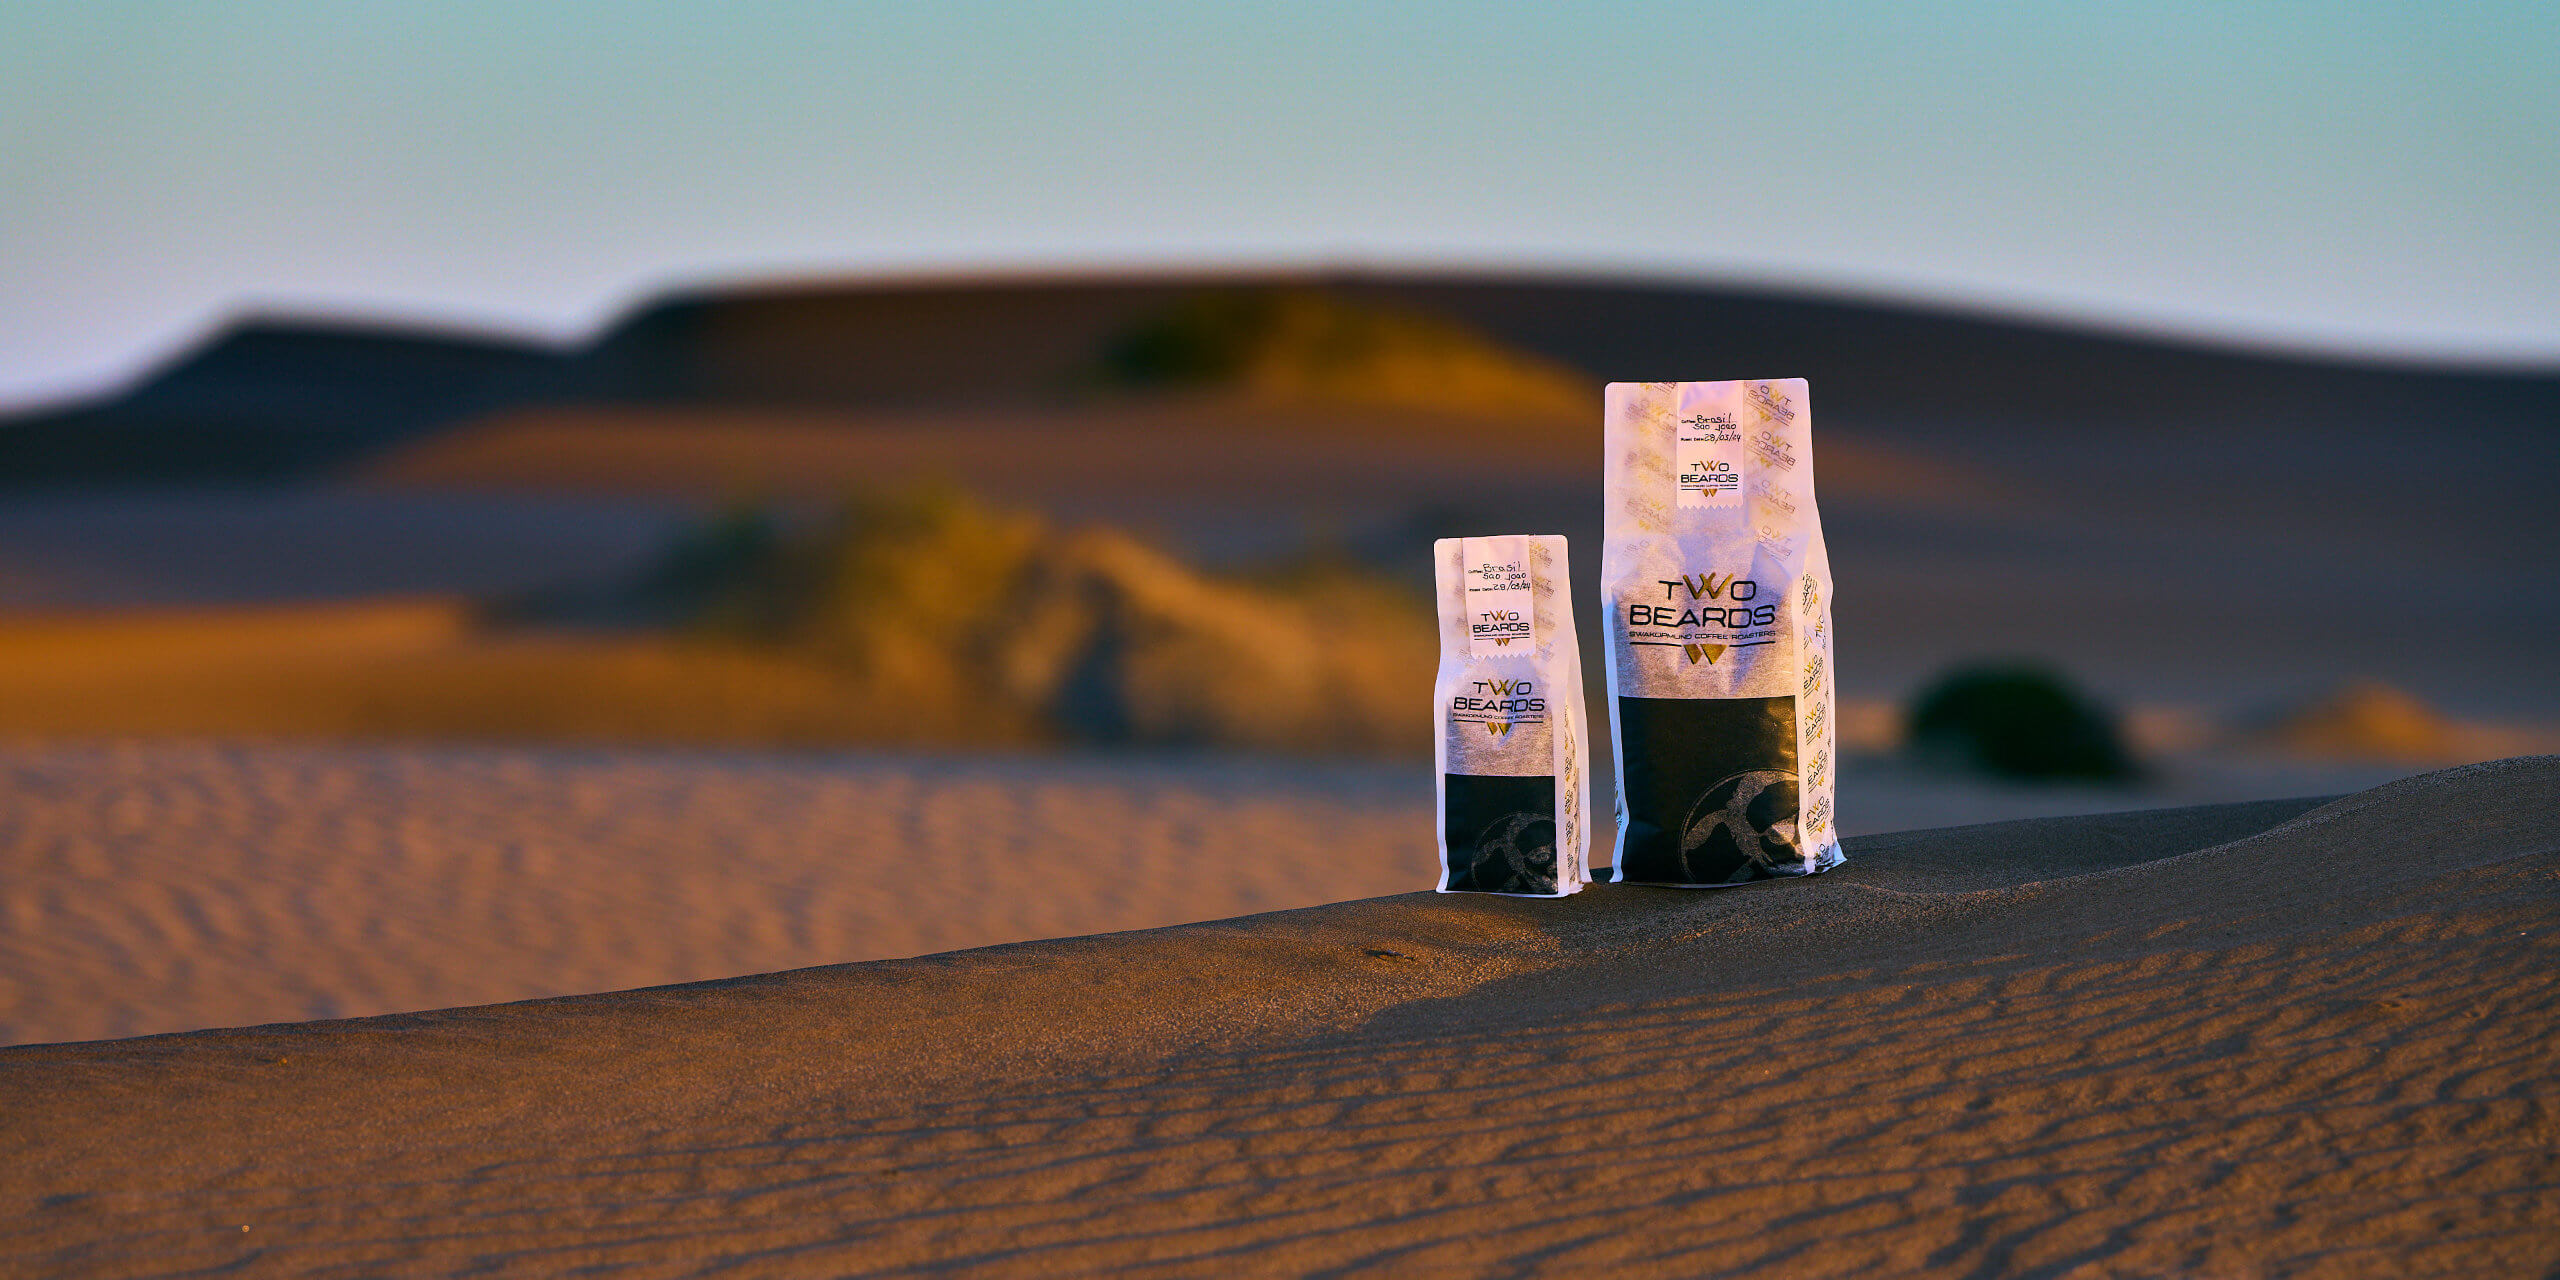 Beard Coffee Bags in Namib Dunes: The photo captures two Beard Coffee Bags placed amidst the vast dunes of the Namib Desert. The bags are prominently featured against the backdrop of the rolling sandy landscape, highlighting the contrast between the product and the natural beauty of the desert.